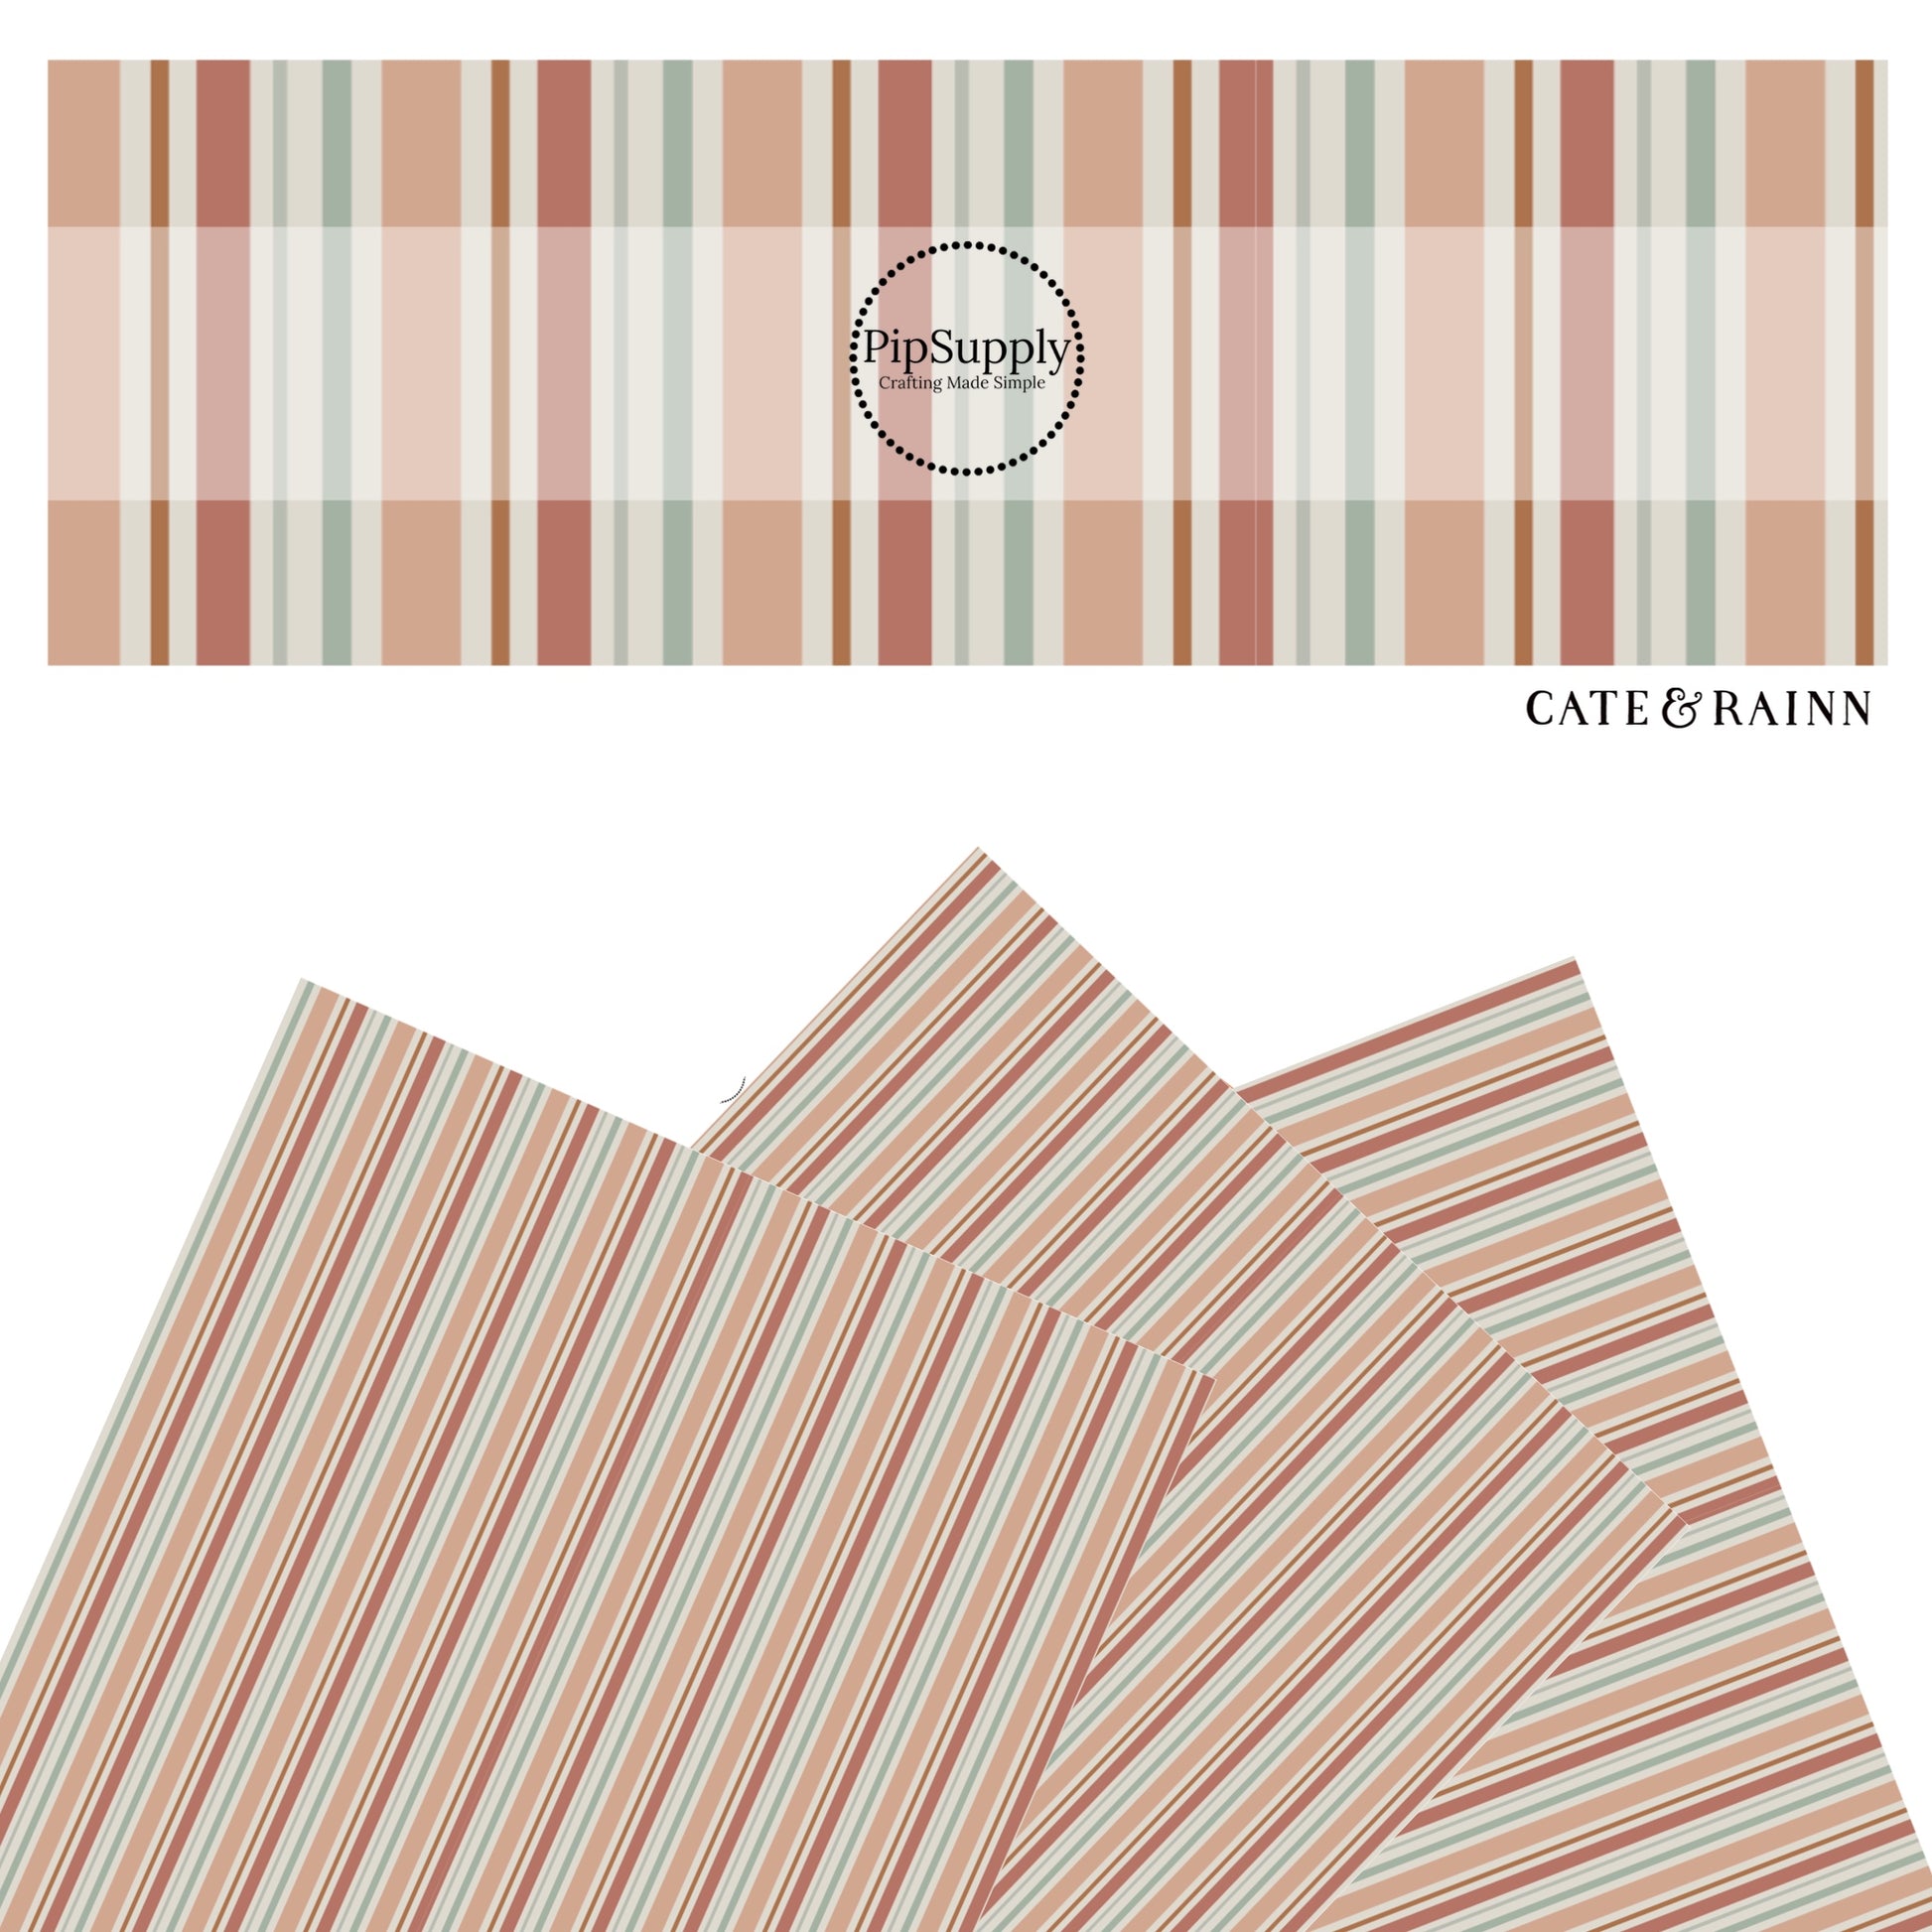 These summer pattern faux leather sheets contain the following design elements: multi color stripe patterns. Our CPSIA compliant faux leather sheets or rolls can be used for all types of crafting projects.